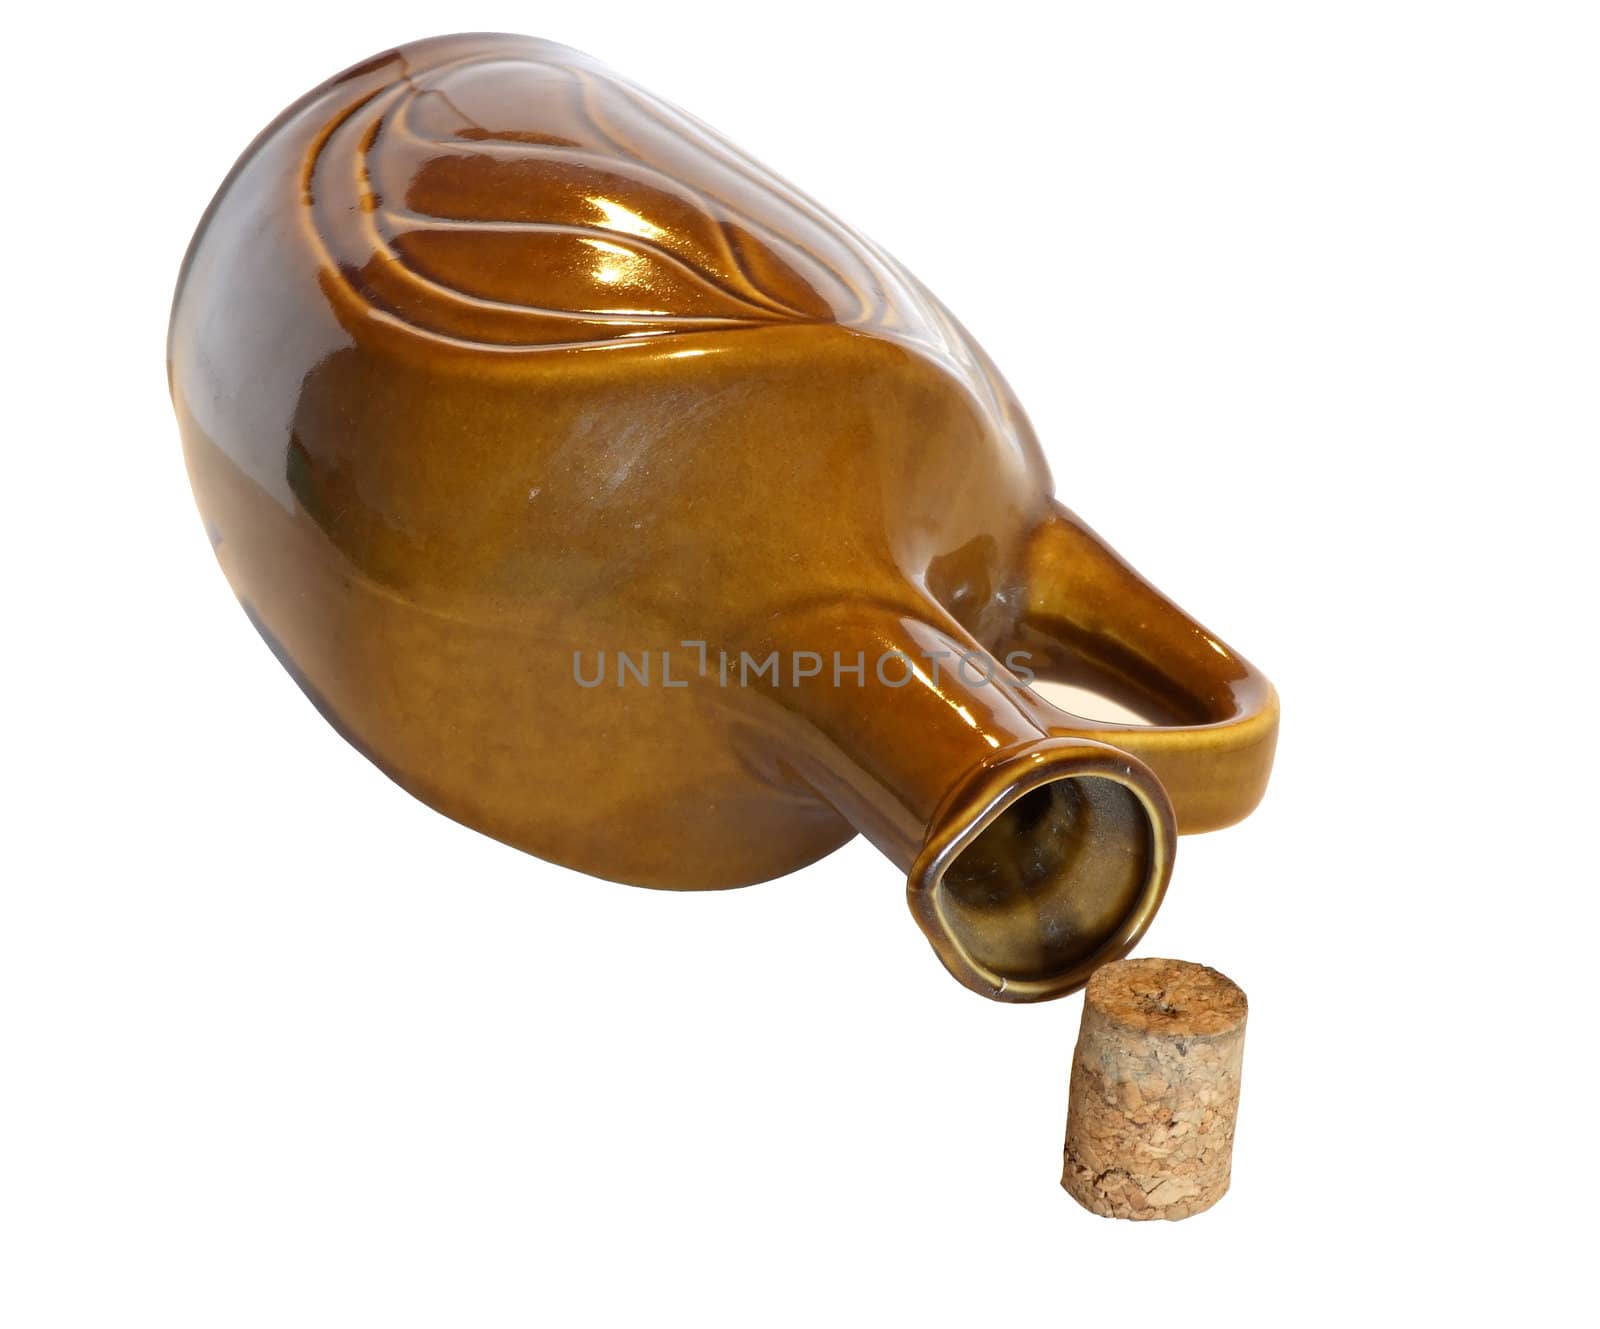 Porcelain bottle of wine, isolated on white with clipping path